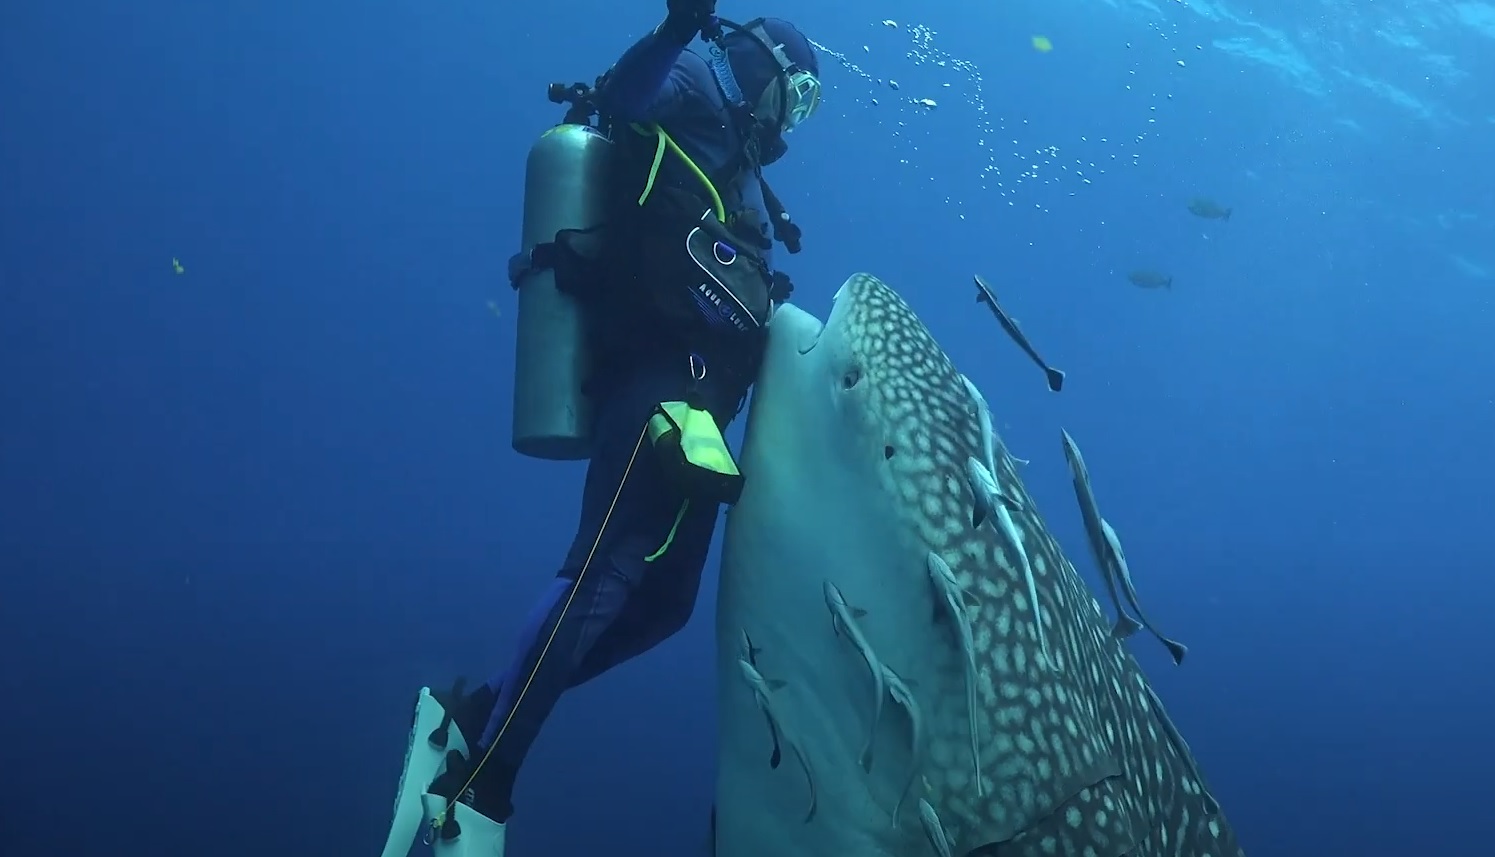 A Close Encounter Between a Whale Shark And Diver